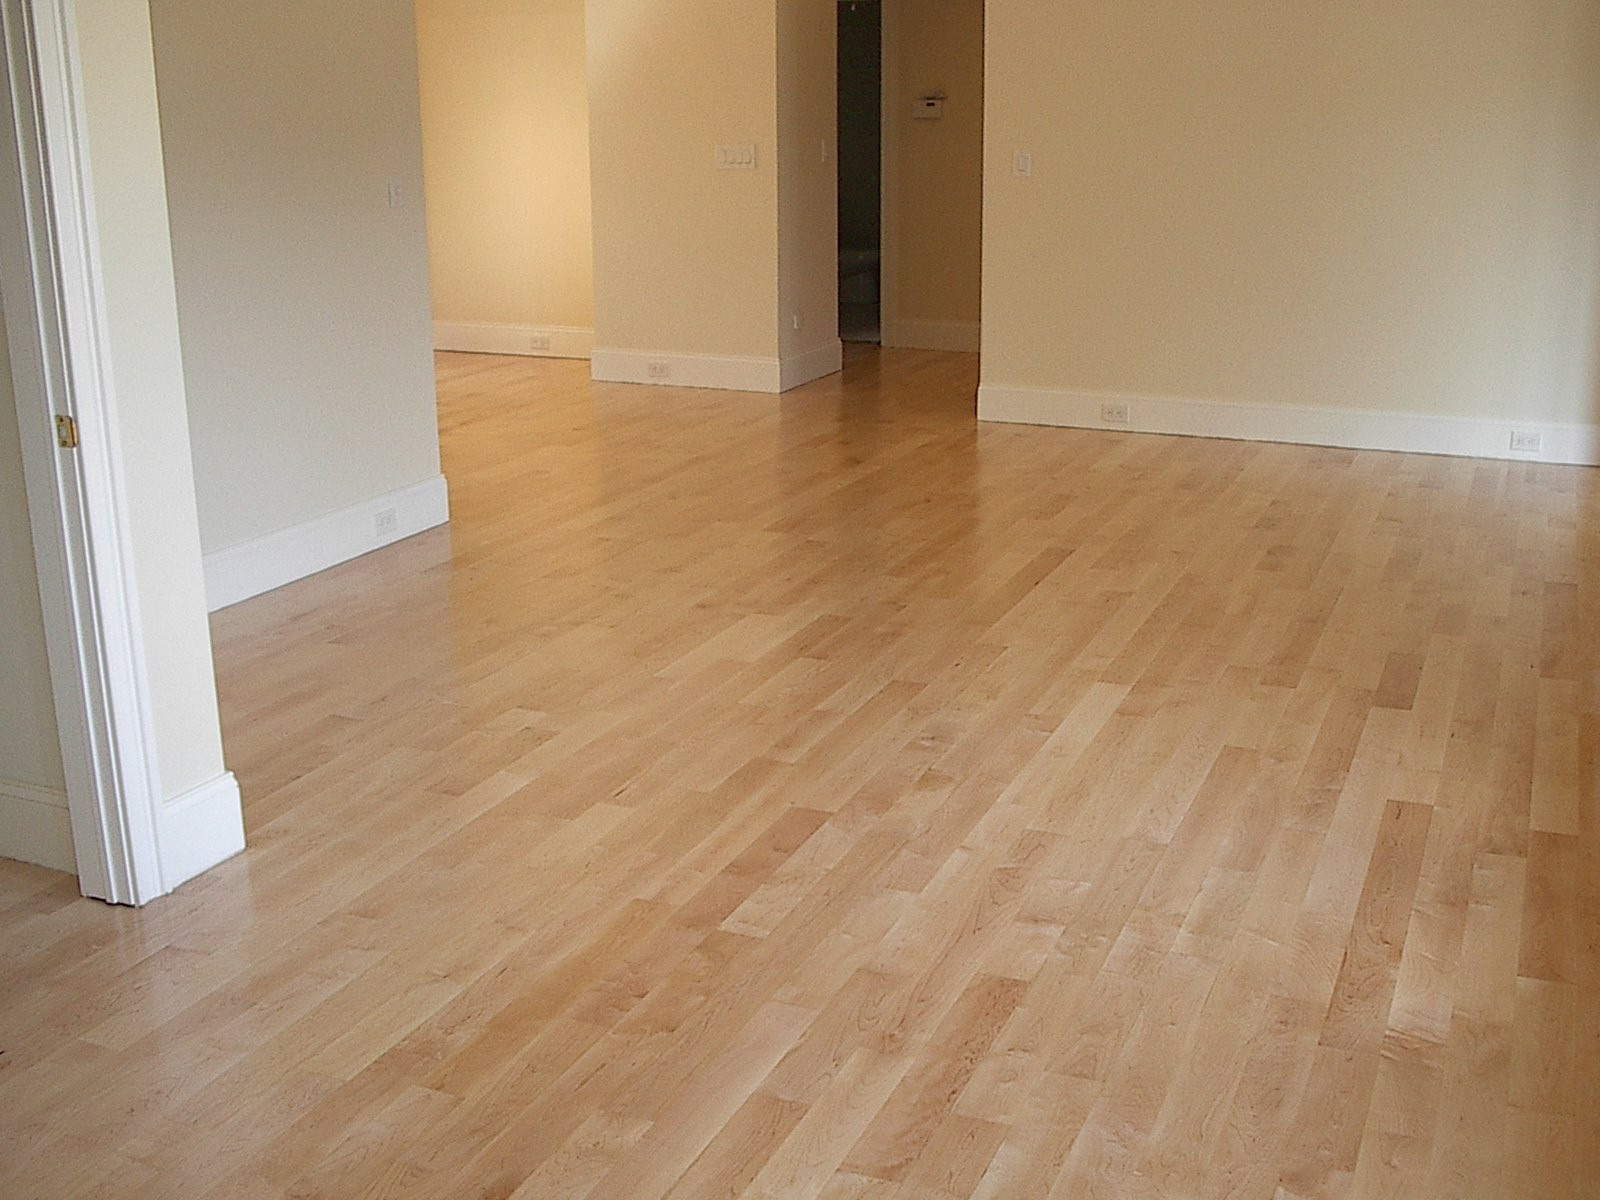 how much should refinishing hardwood floors cost of cost to refinish hardwood floors floor plan ideas regarding cost hardwood flooring installed calculator awesome cost to get hardwood floors installed how much does